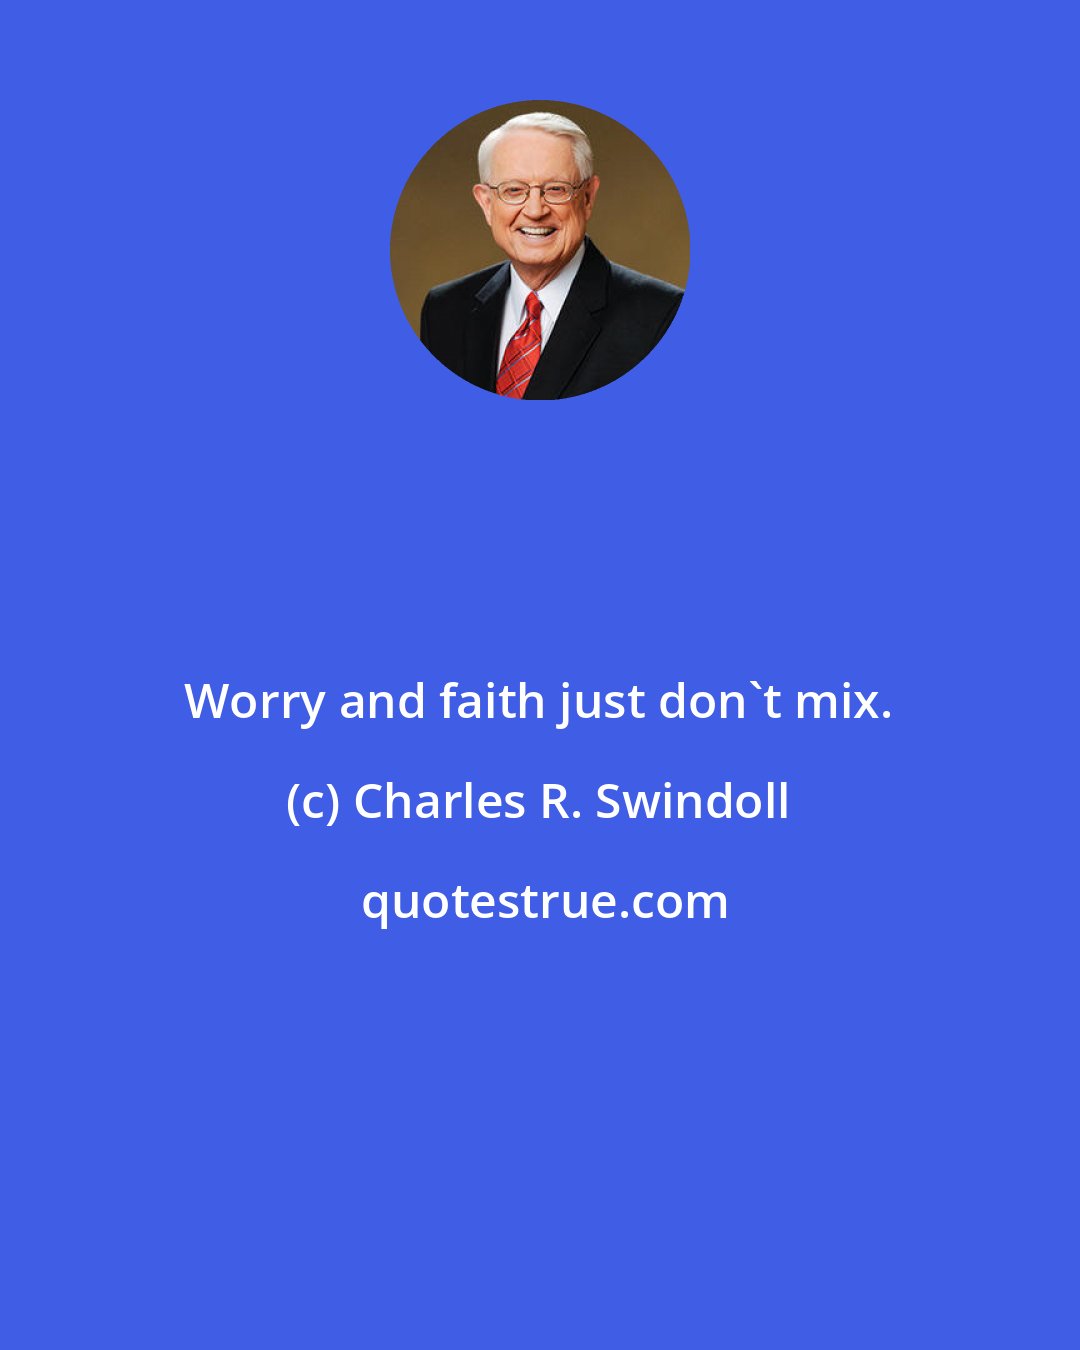 Charles R. Swindoll: Worry and faith just don't mix.